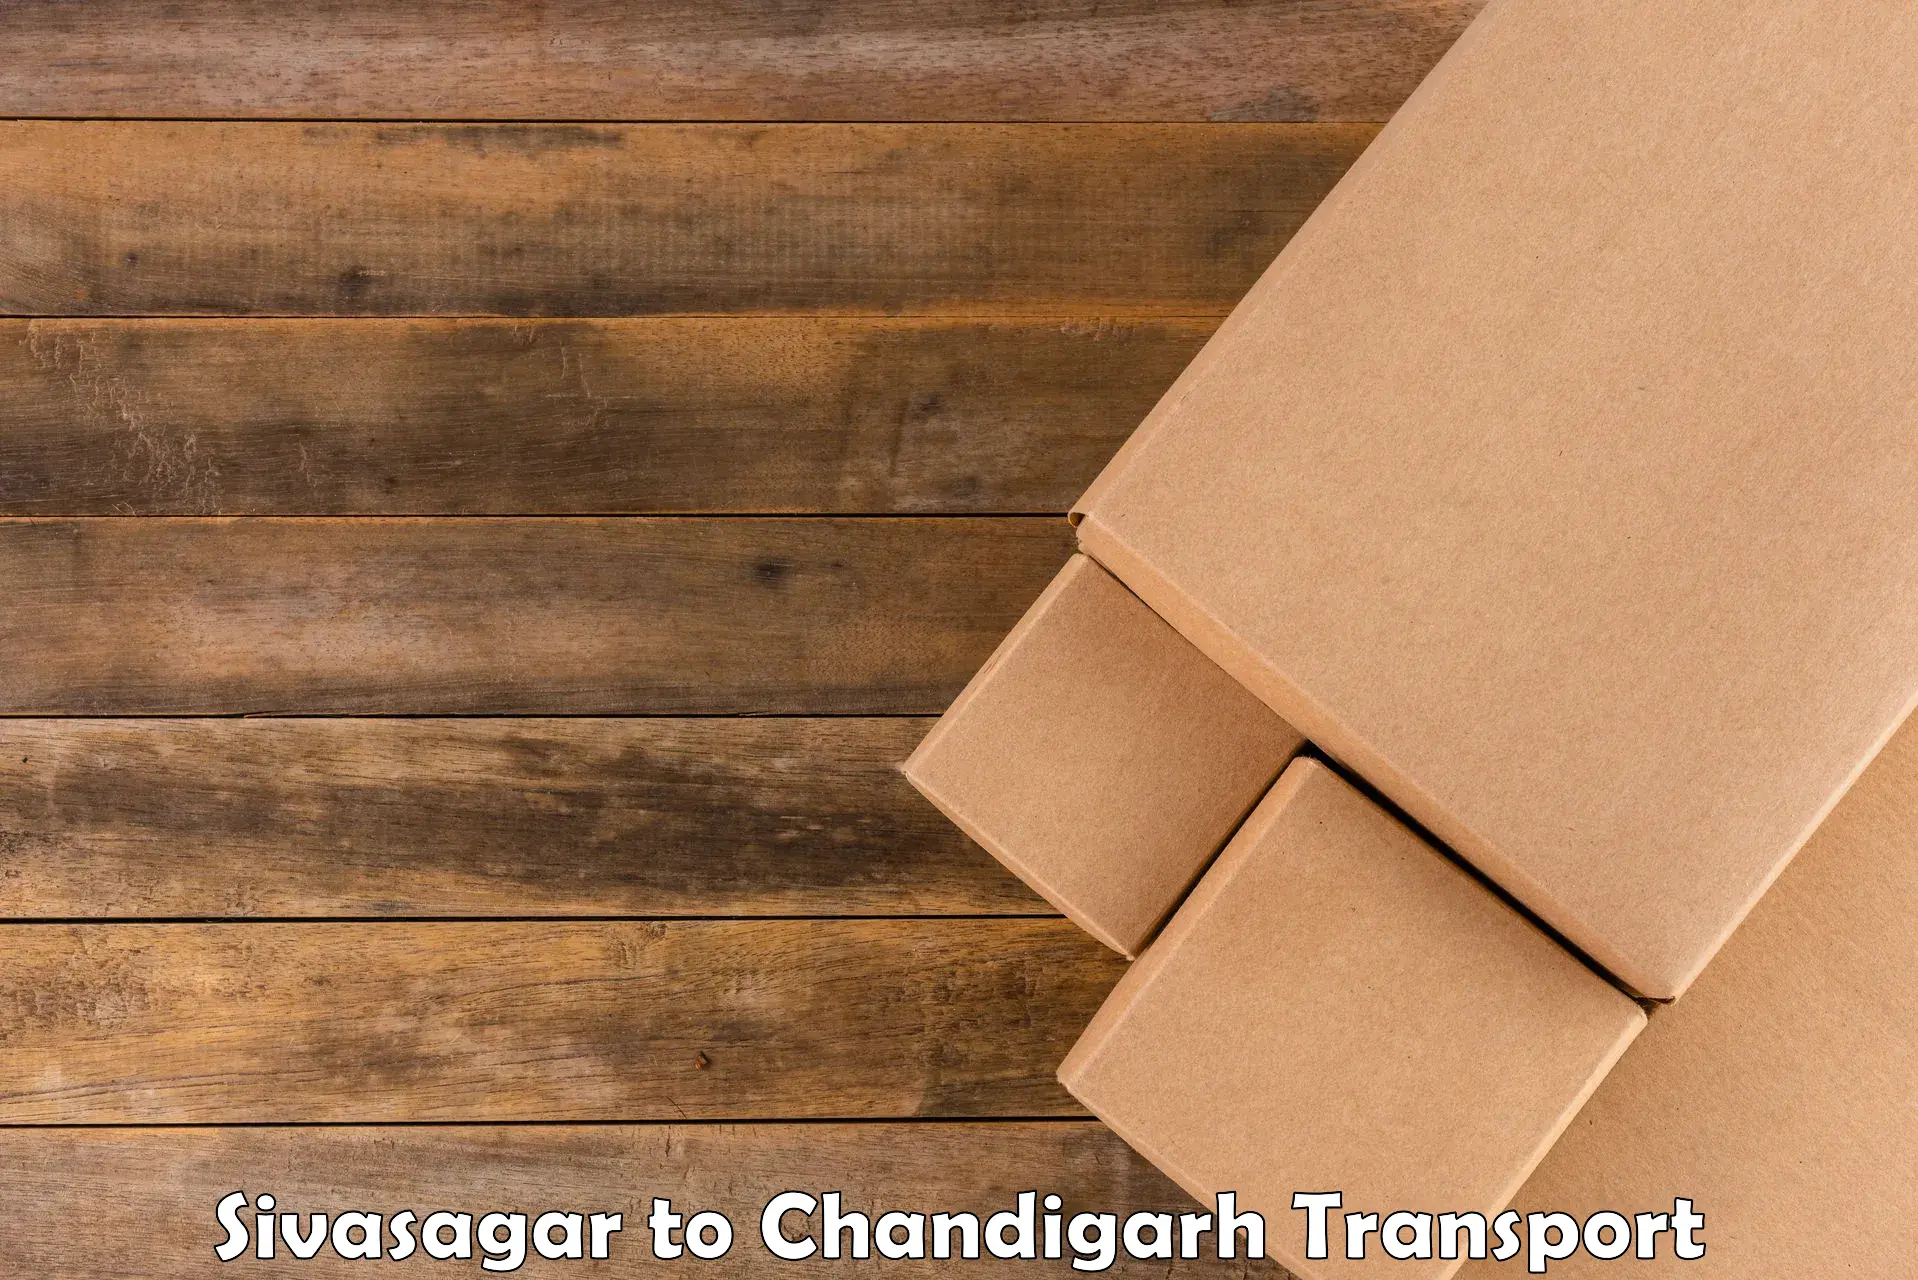 Part load transport service in India Sivasagar to Chandigarh